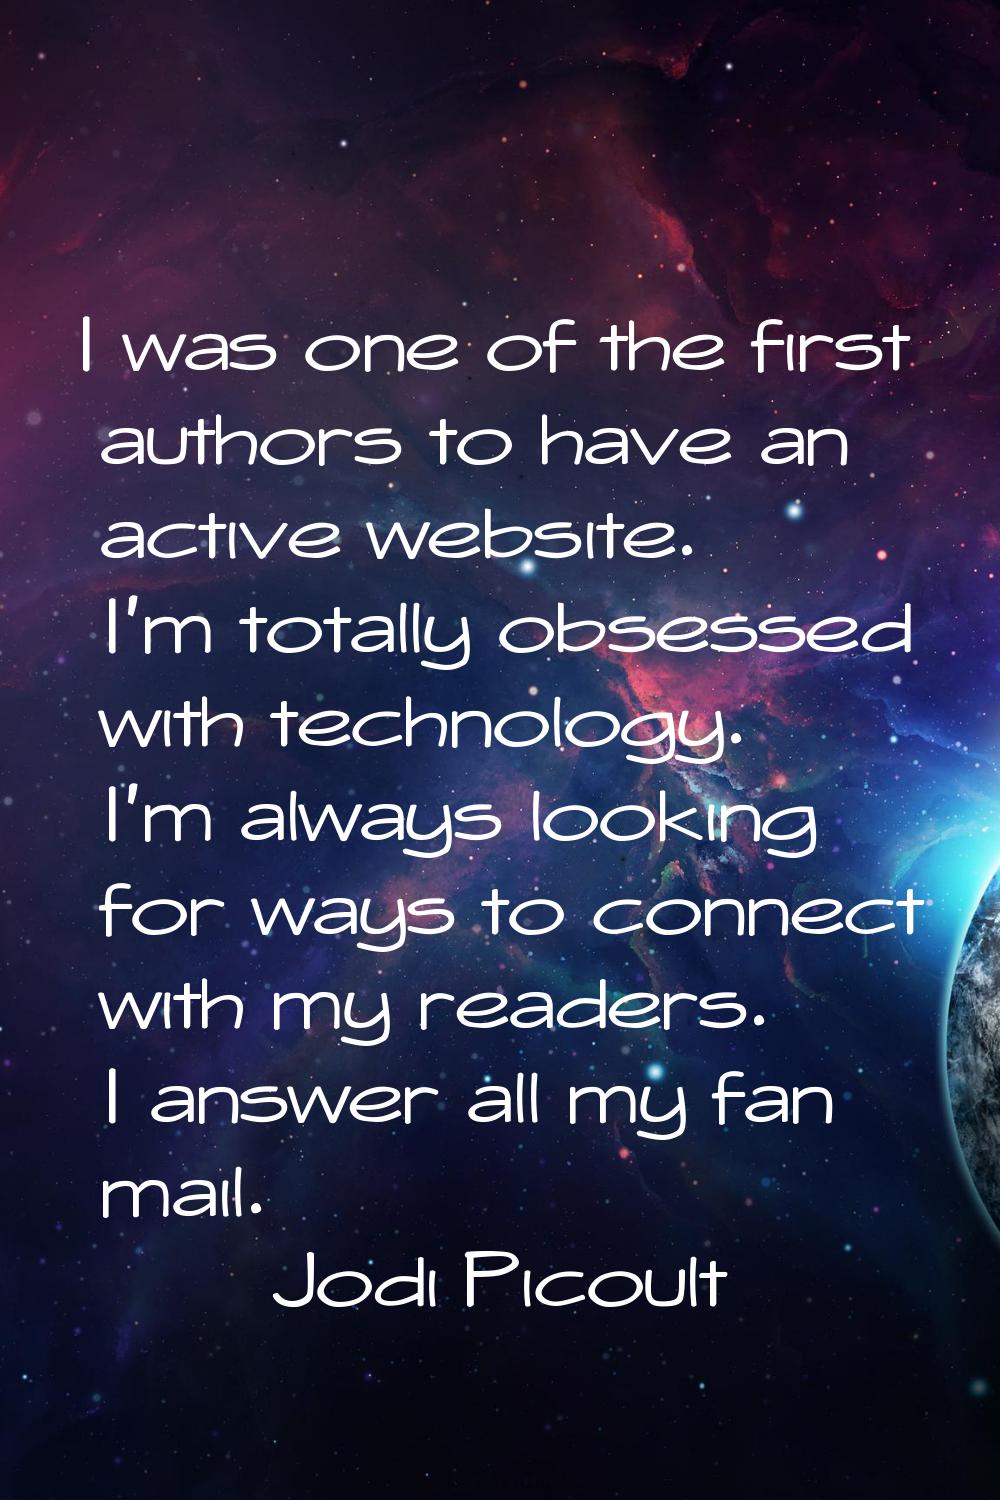 I was one of the first authors to have an active website. I'm totally obsessed with technology. I'm